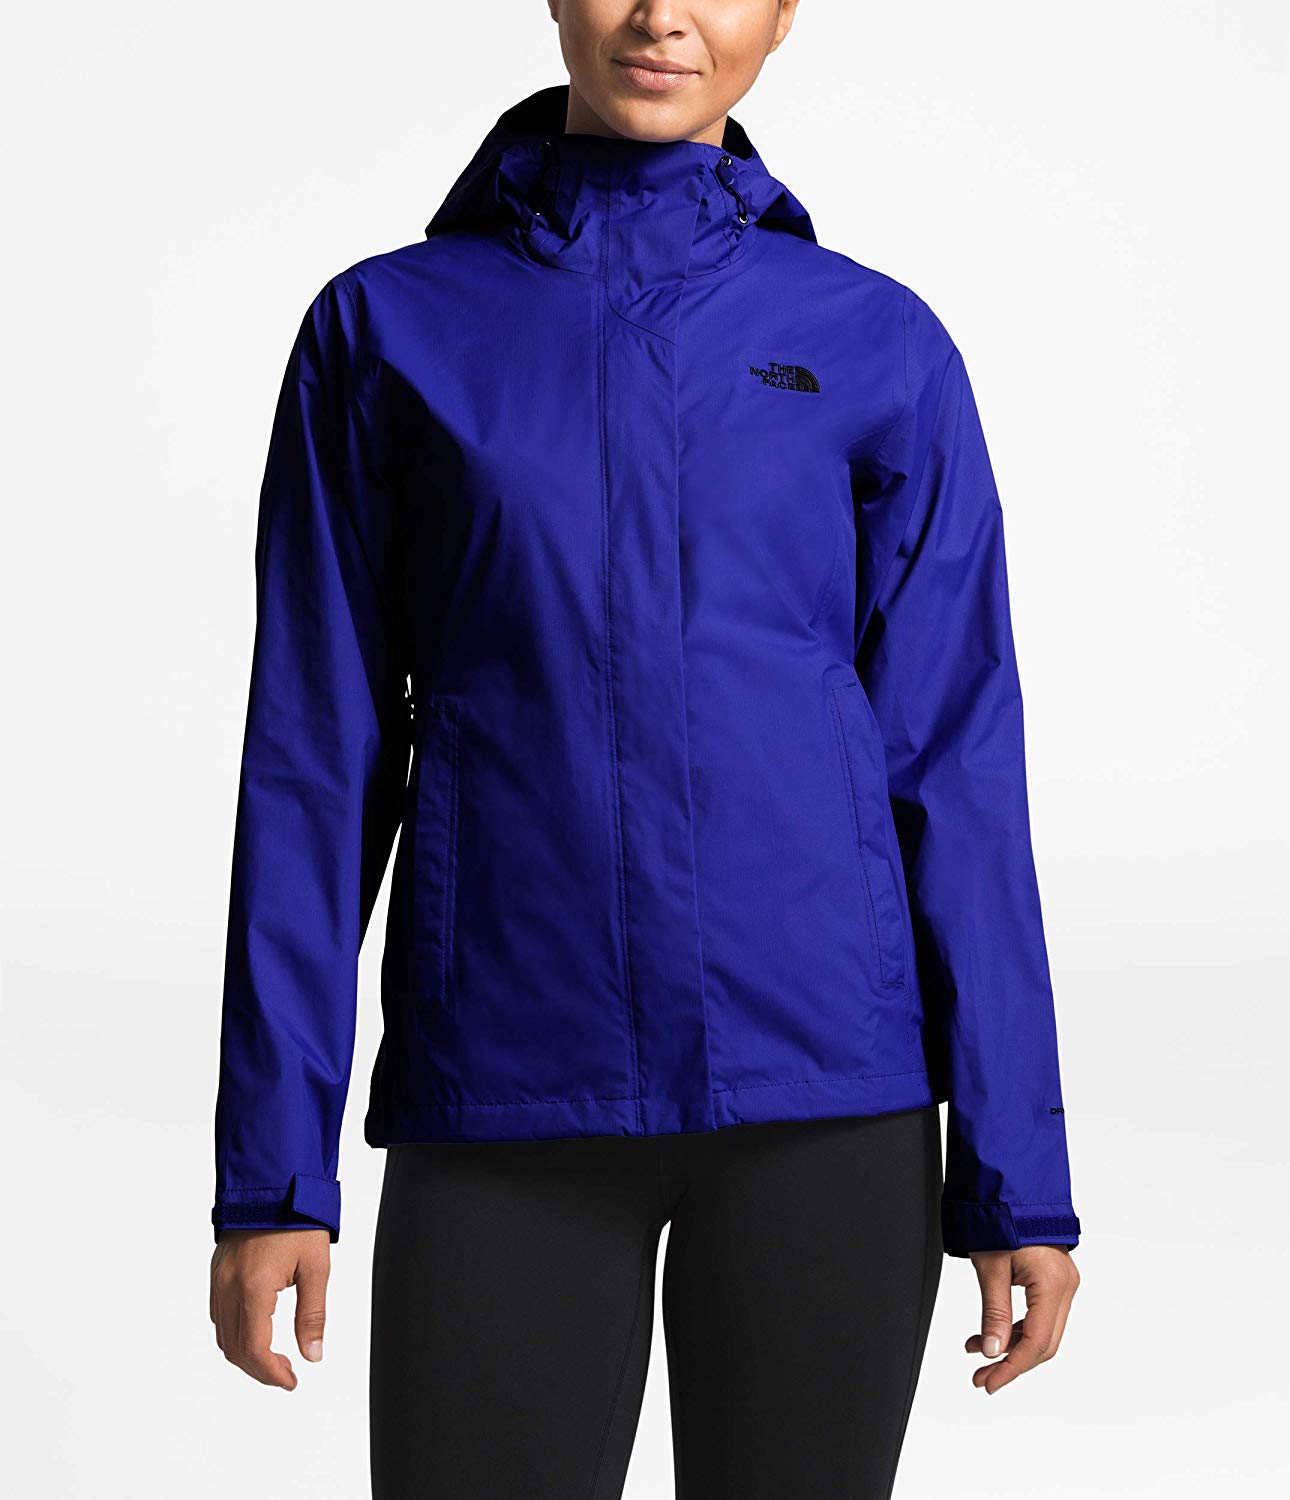 Áo 1 lớp chống nước The North Face Women’s Venture Jacket The North Face size M